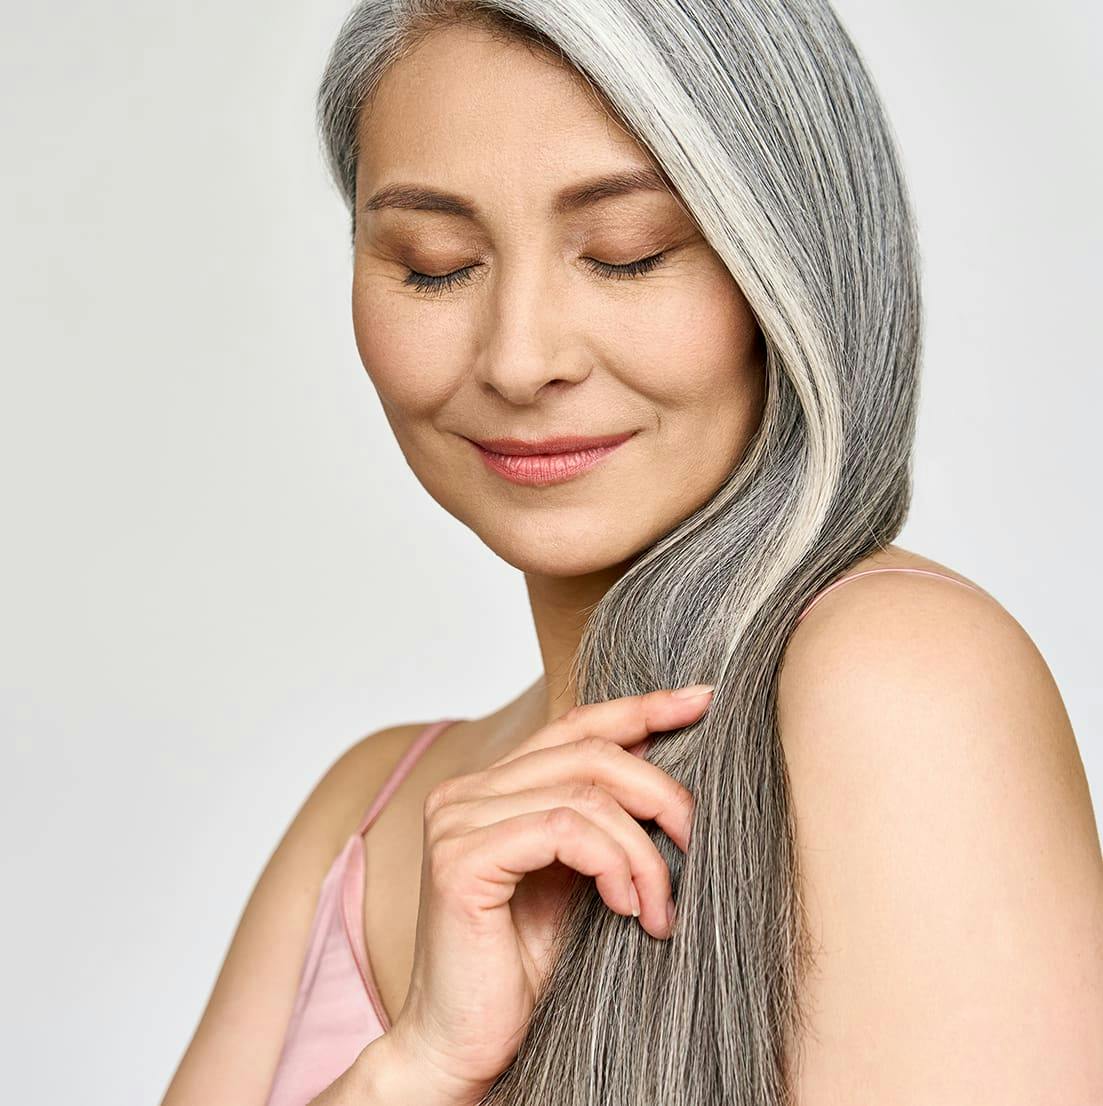 woman with gray long hair smiling